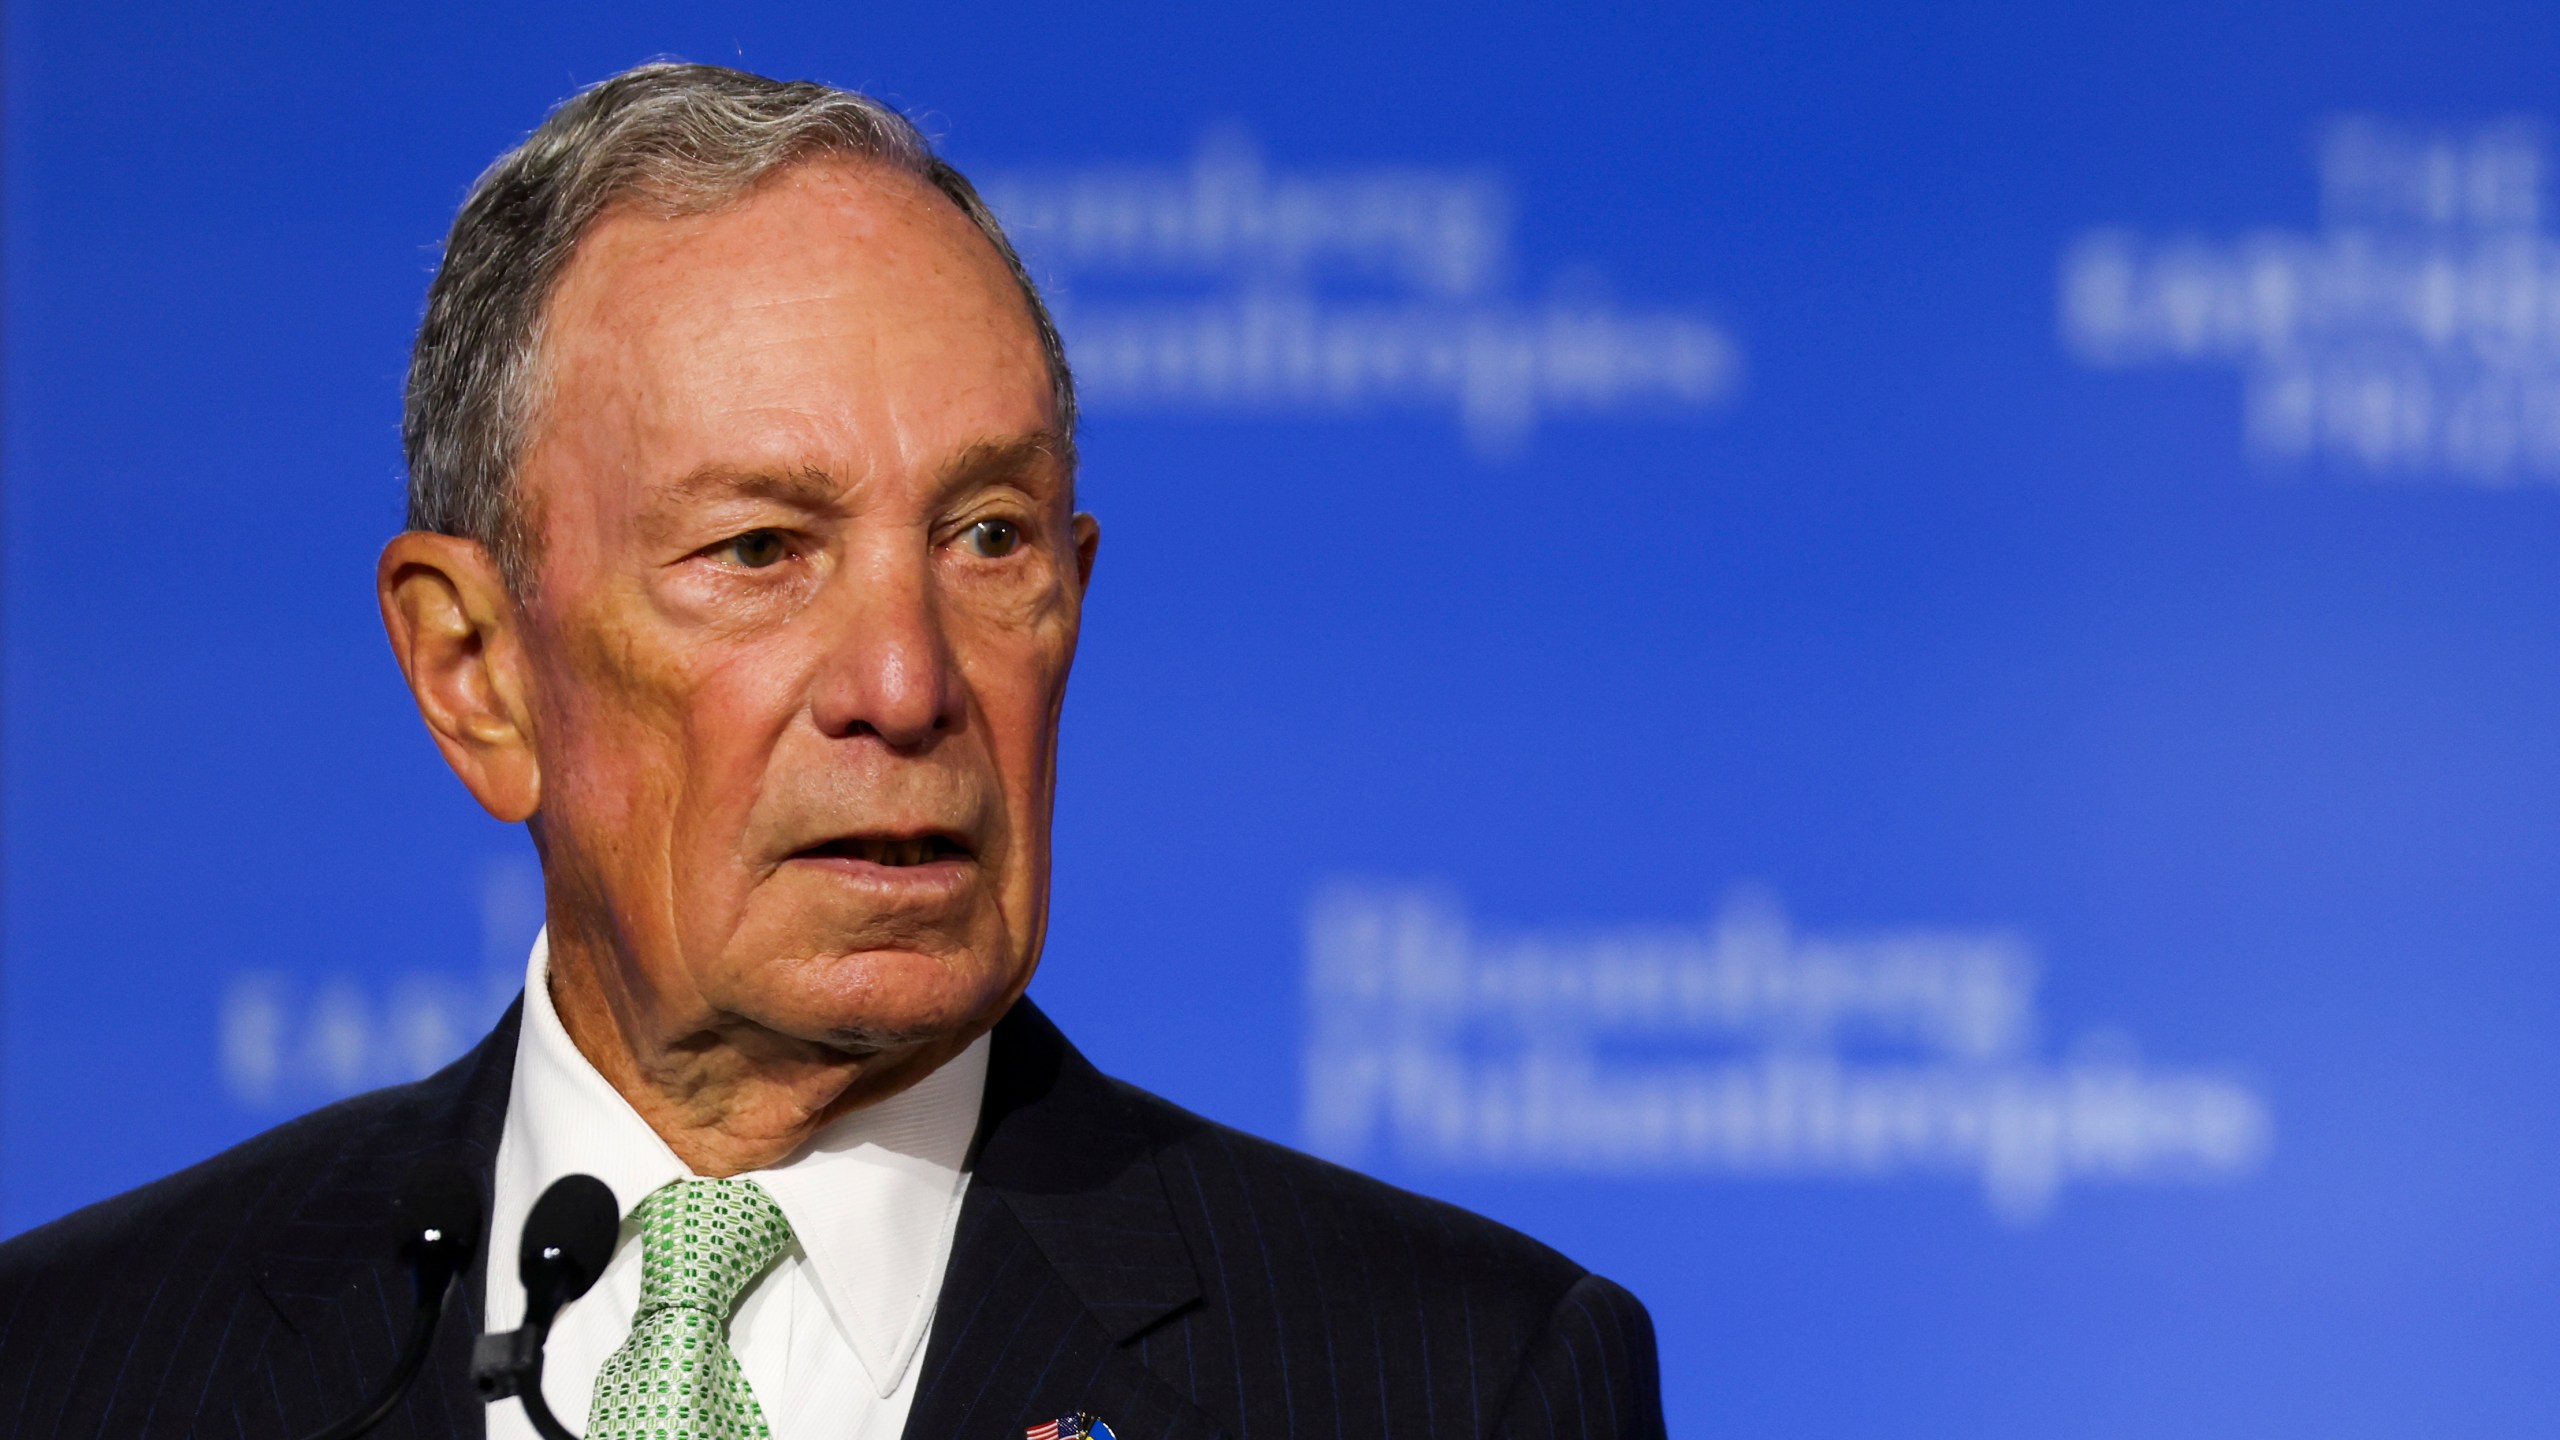 FILE - Former mayor of New York Michael Bloomberg speaks during the Earthshot Prize Innovation Summit in New York, Tuesday, Sept. 19, 2023. Bloomberg, the former New York City mayor, gave the most to charitable causes last year, according to the Chronicle of Philanthropy’s exclusive list of the 50 Americans who donated the largest sums to nonprofits last year. Bloomberg contributed $3 billion to support the arts, education, environment, public health, and programs aimed at improving city governments around the world, (Shannon Stapleton via AP, Pool, File)